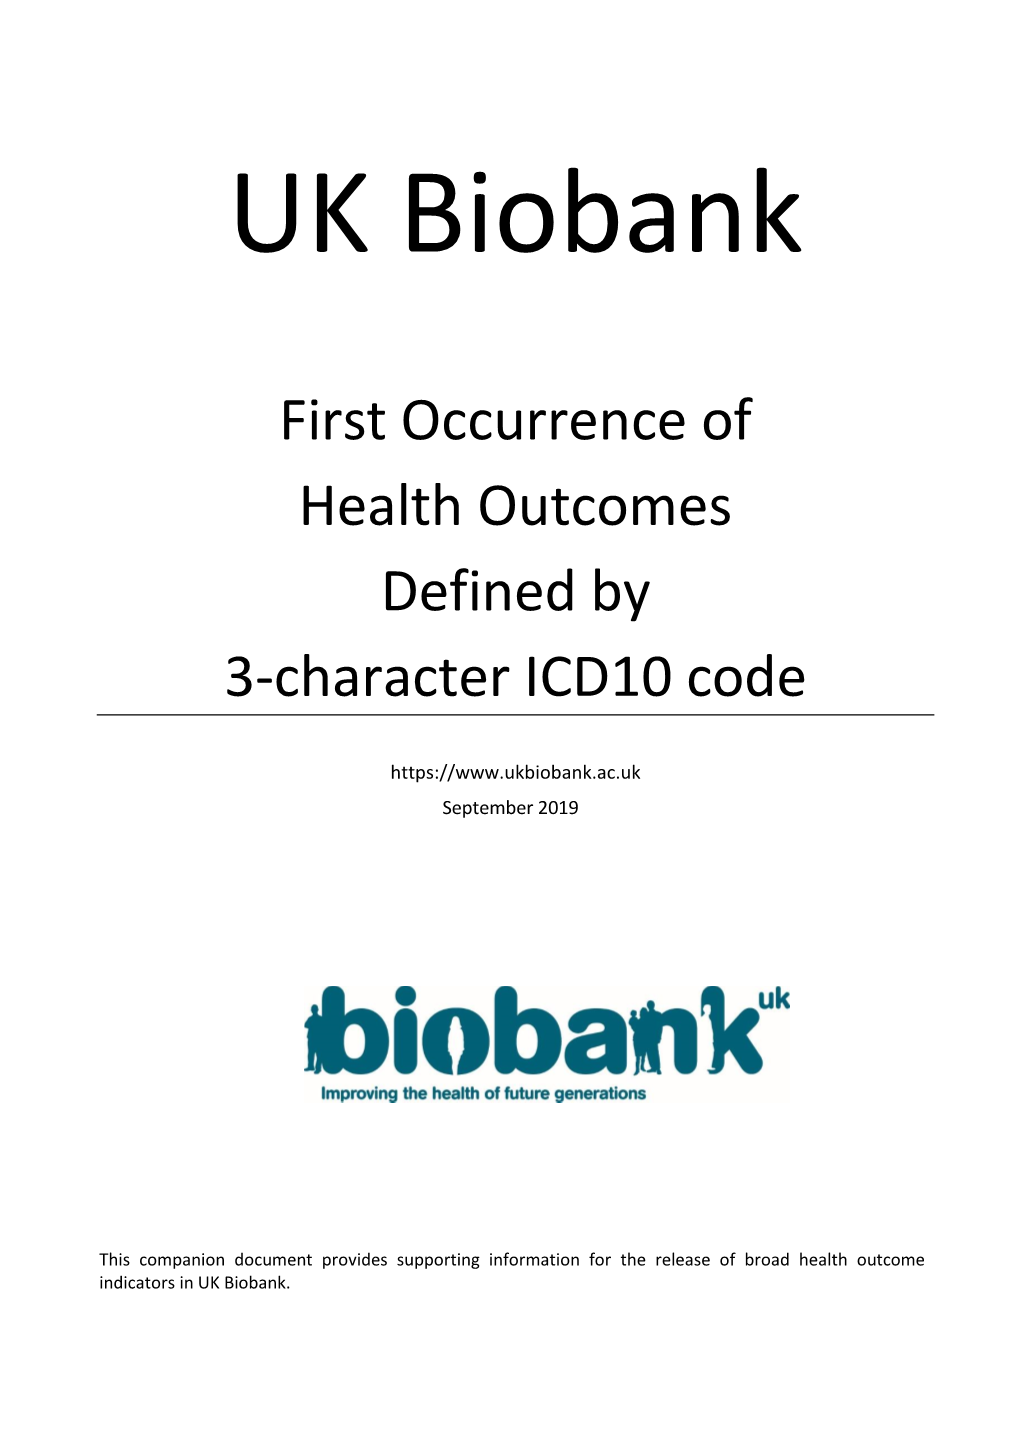 First Occurrence of Health Outcomes Defined by 3-Character ICD10 Code